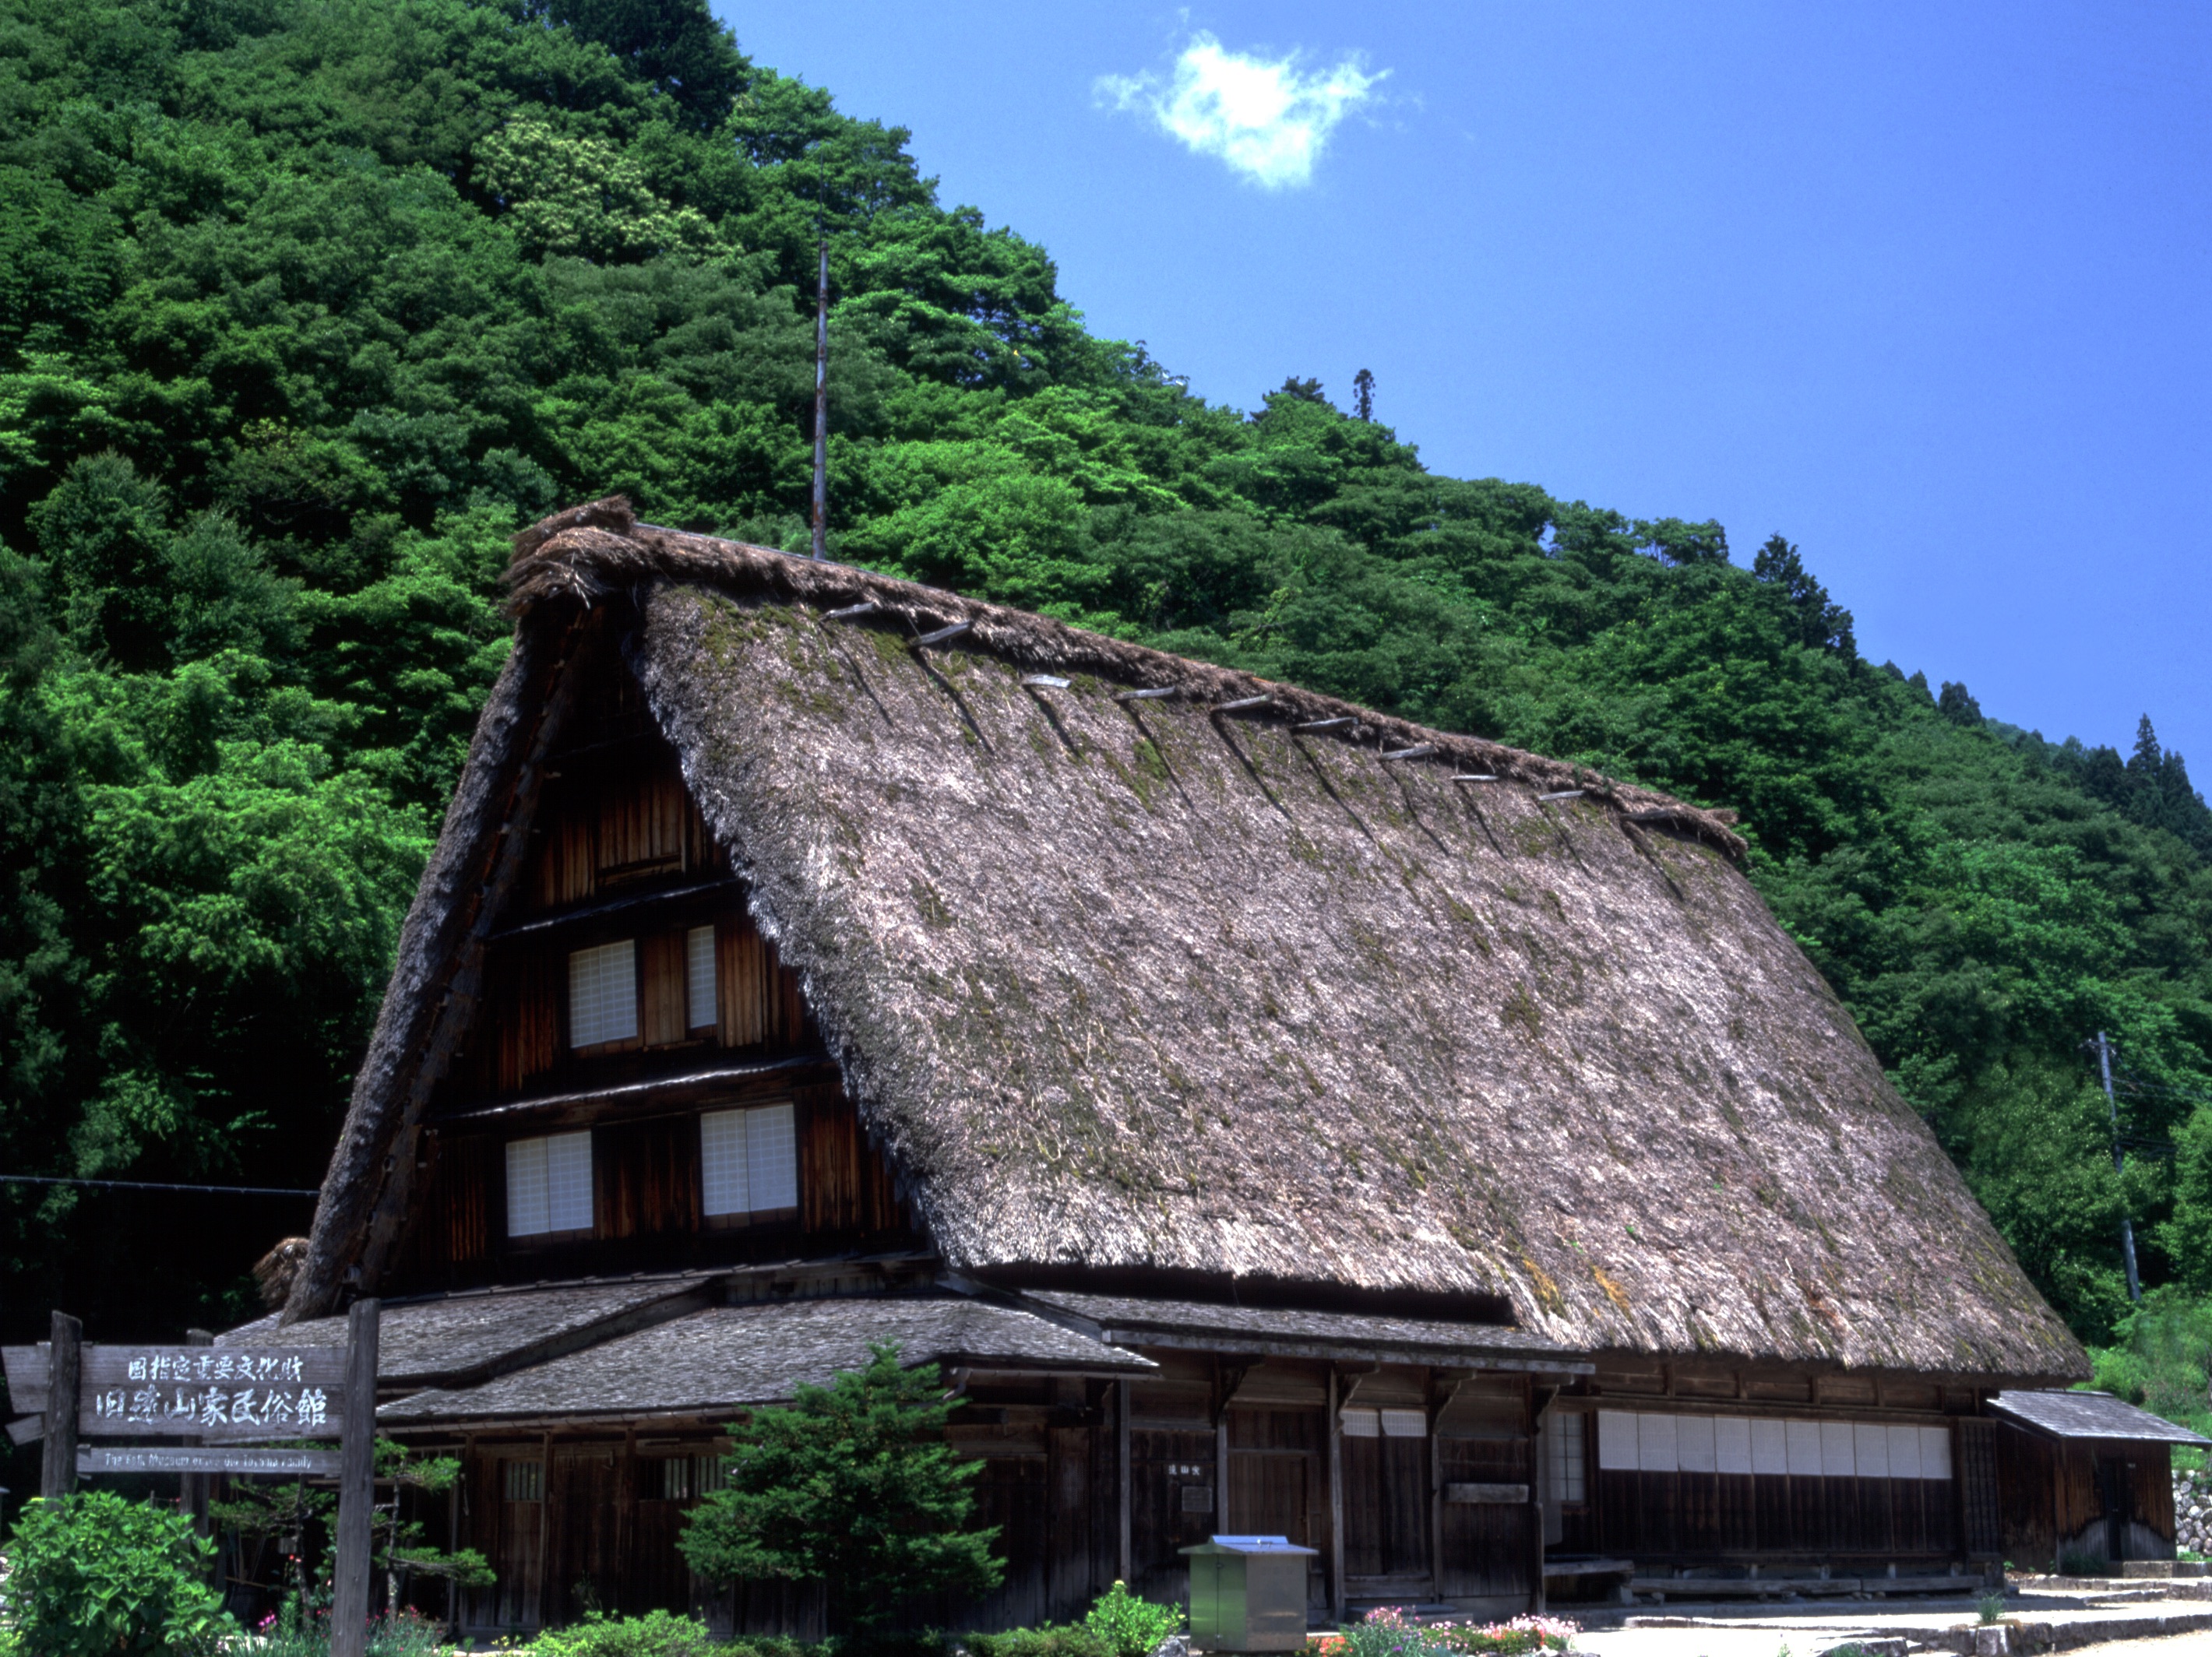 Folk Museum of the Old Toyama Family